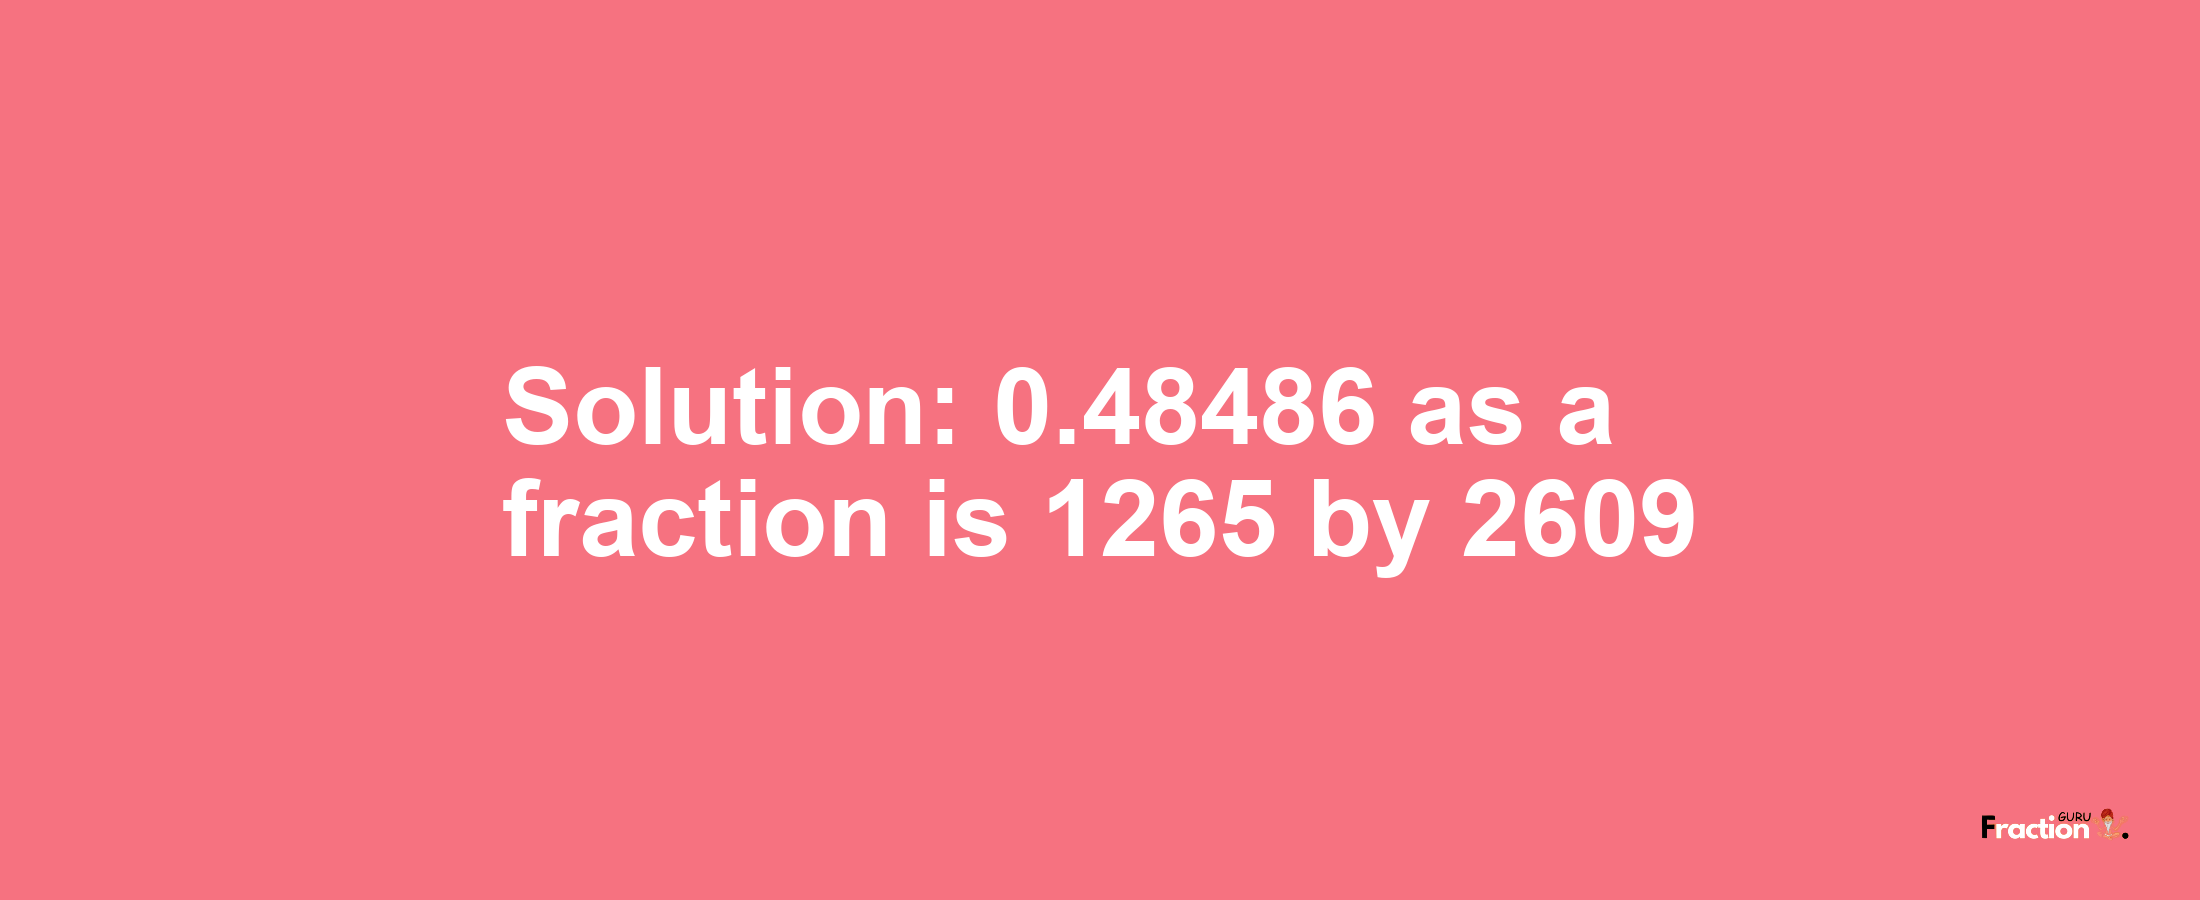 Solution:0.48486 as a fraction is 1265/2609